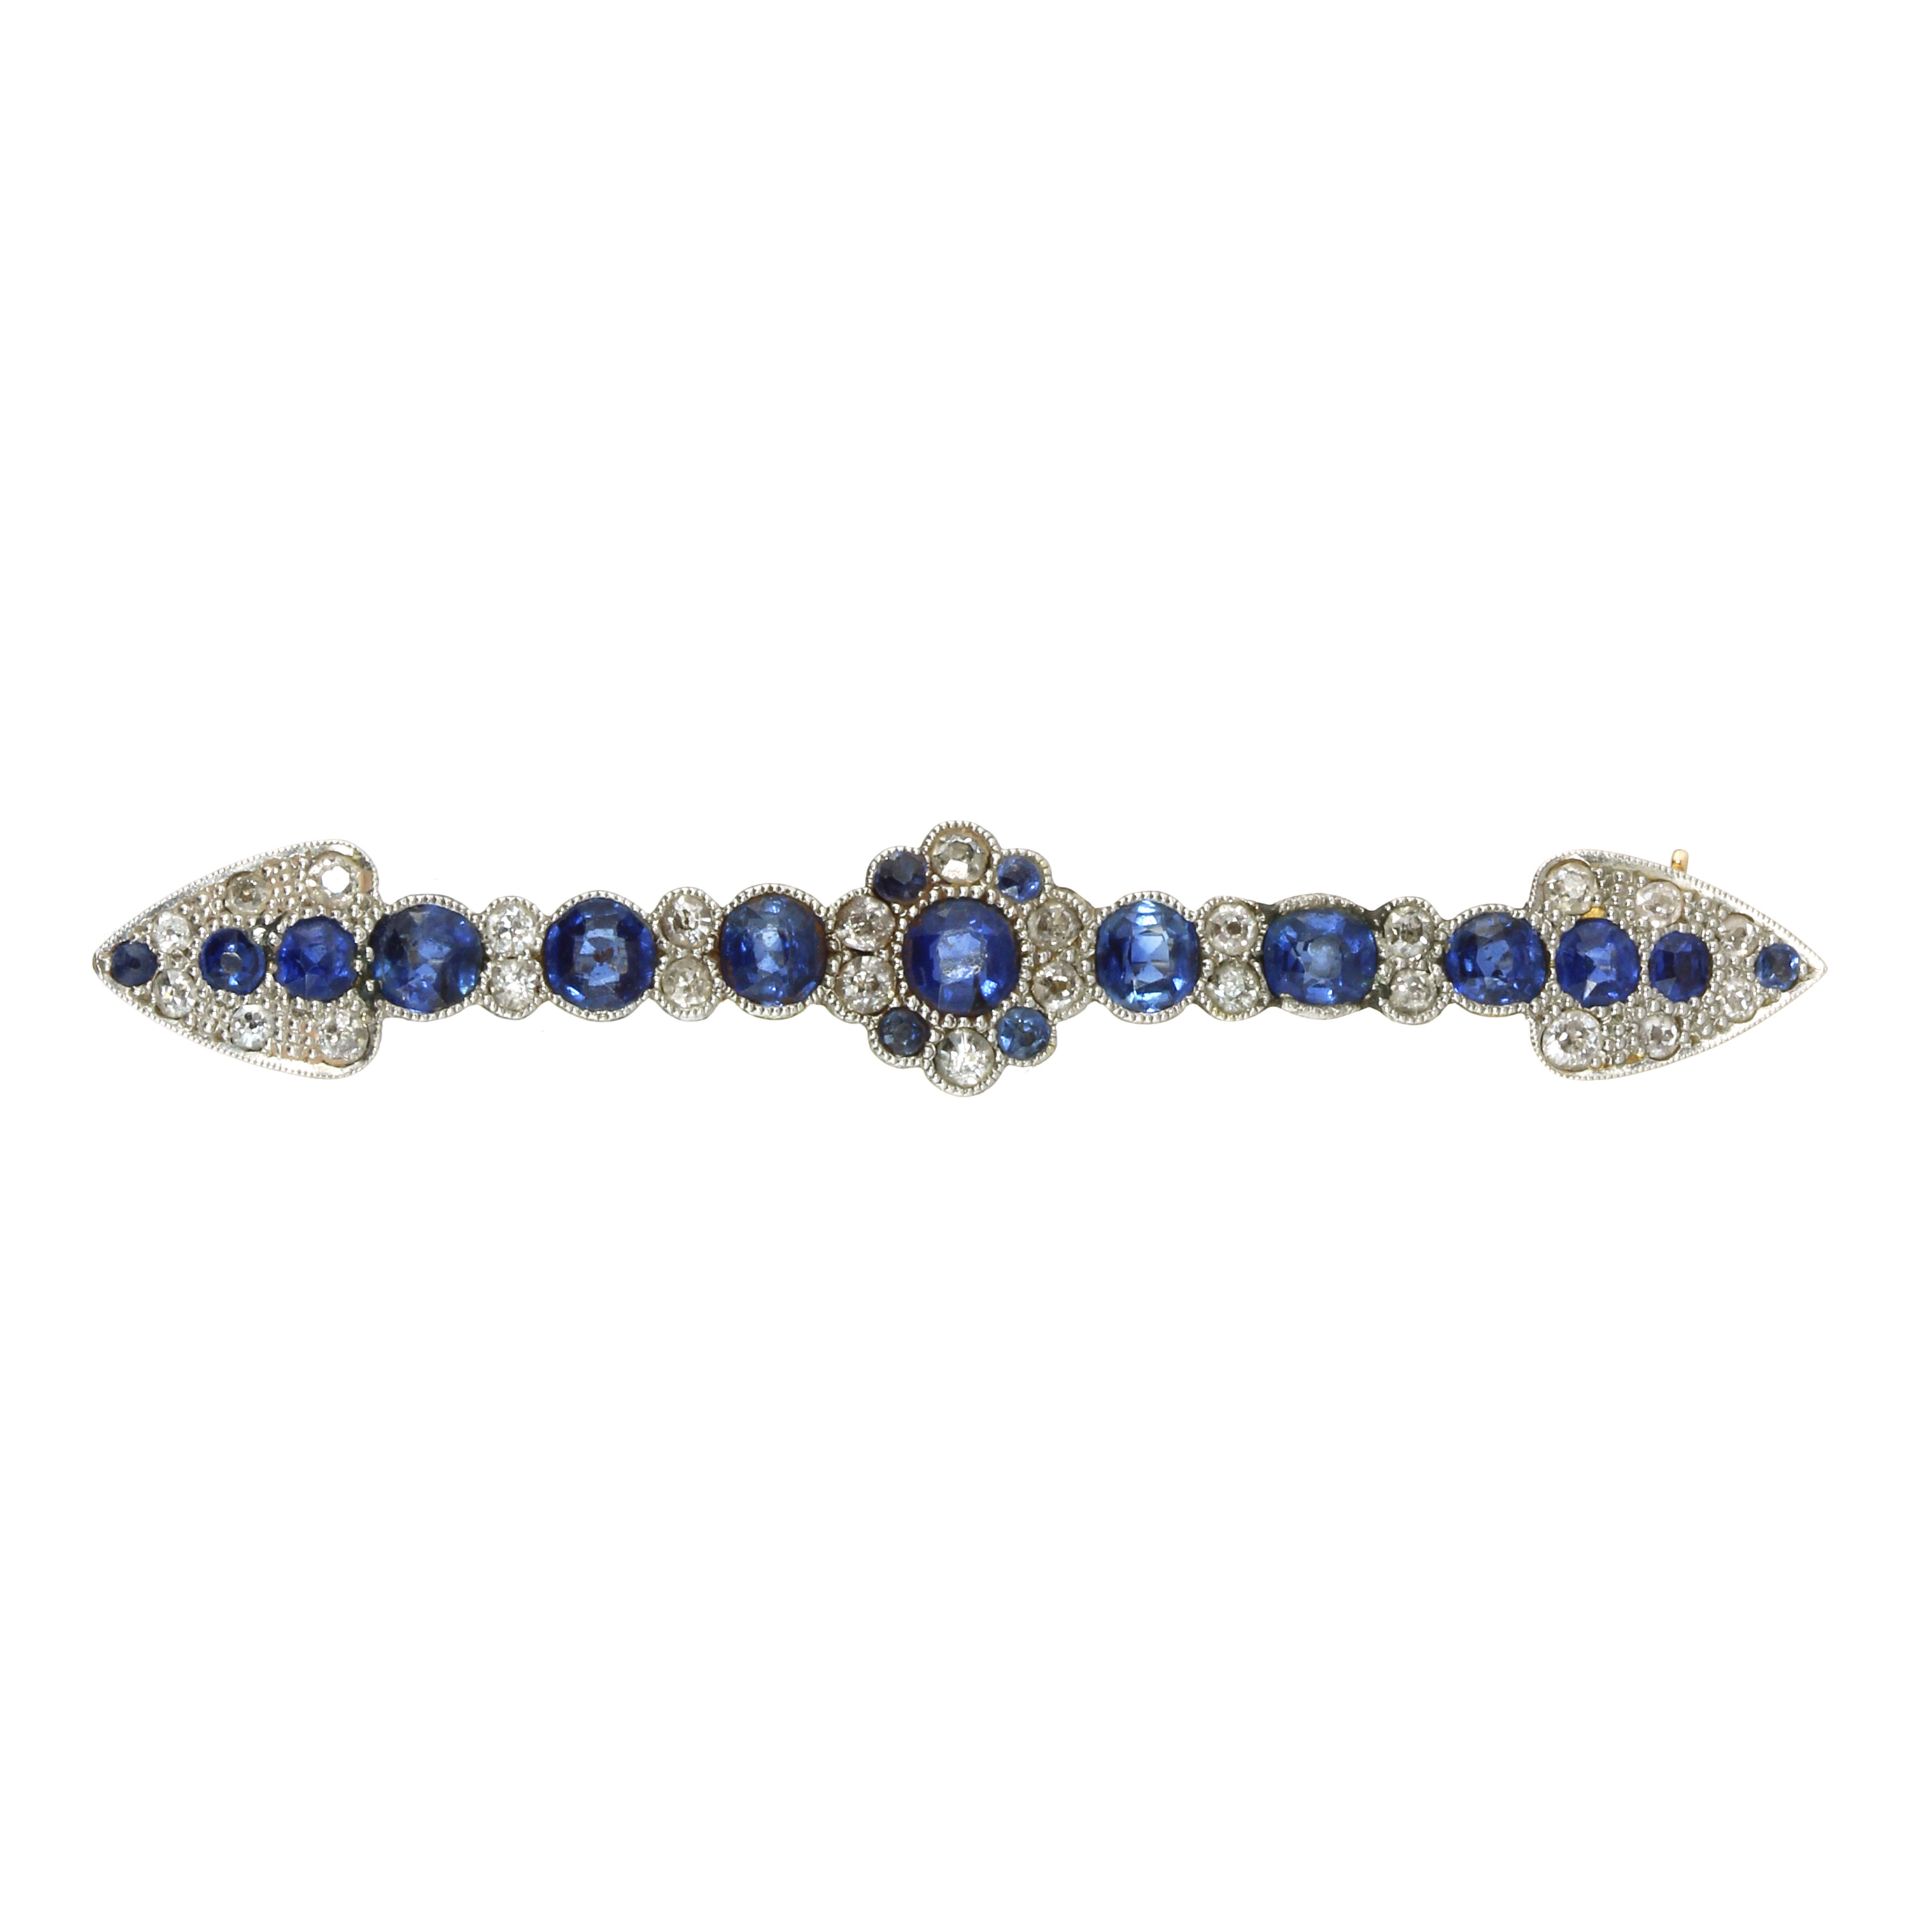 AN ANTIQUE SAPPHIRE AND DIAMOND BAR BROOCH in high carat gold set with a central sapphire and